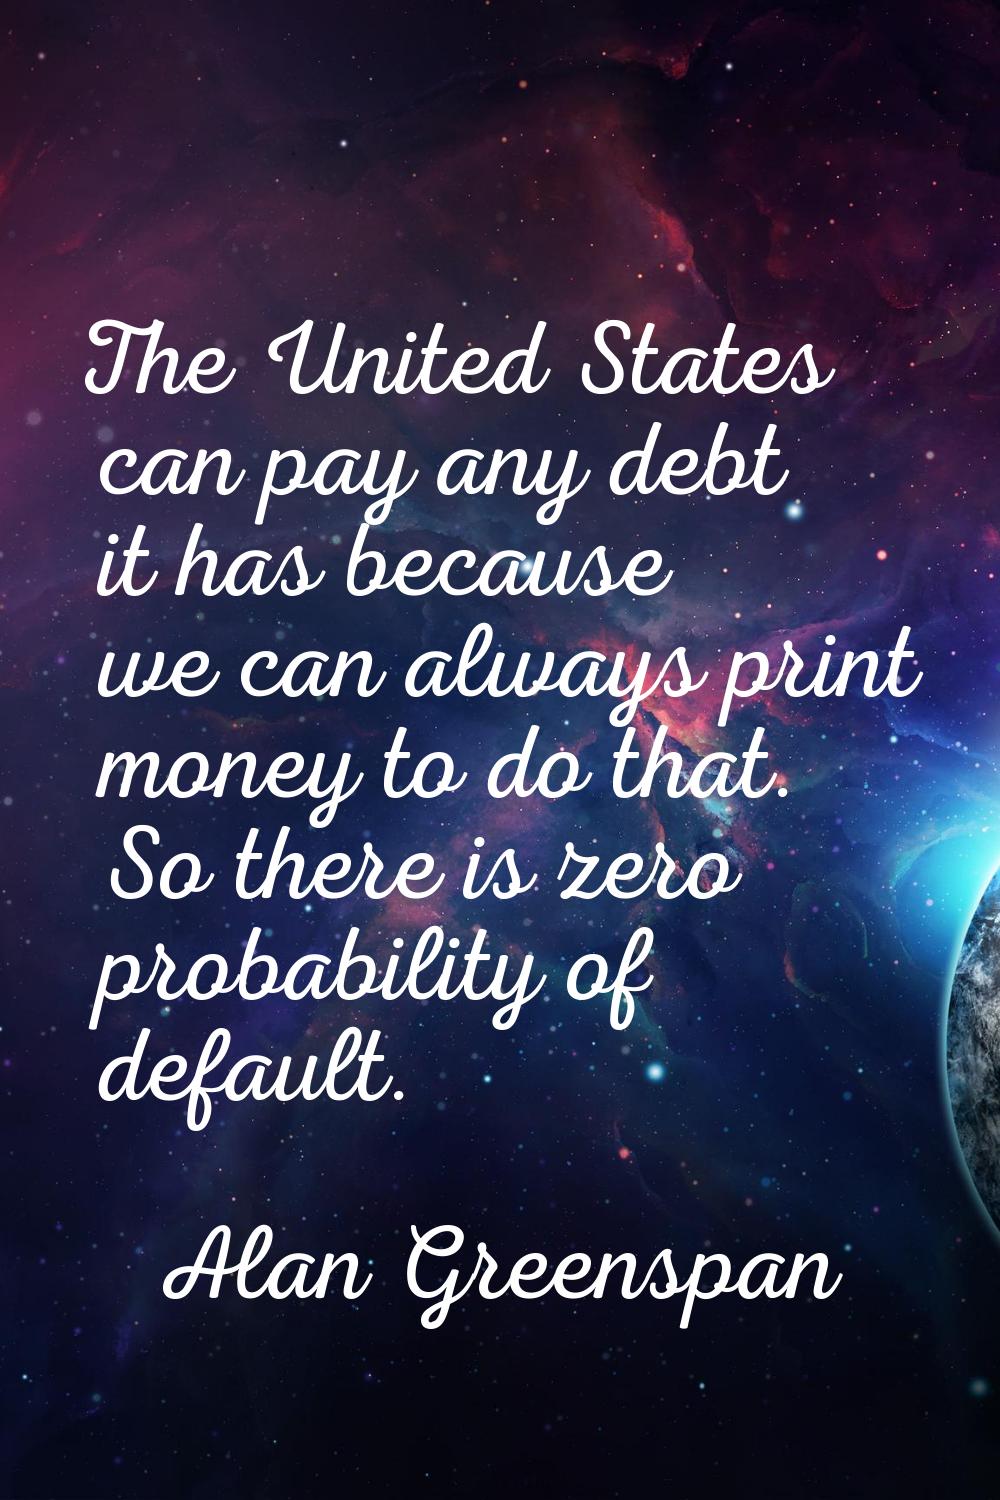 The United States can pay any debt it has because we can always print money to do that. So there is